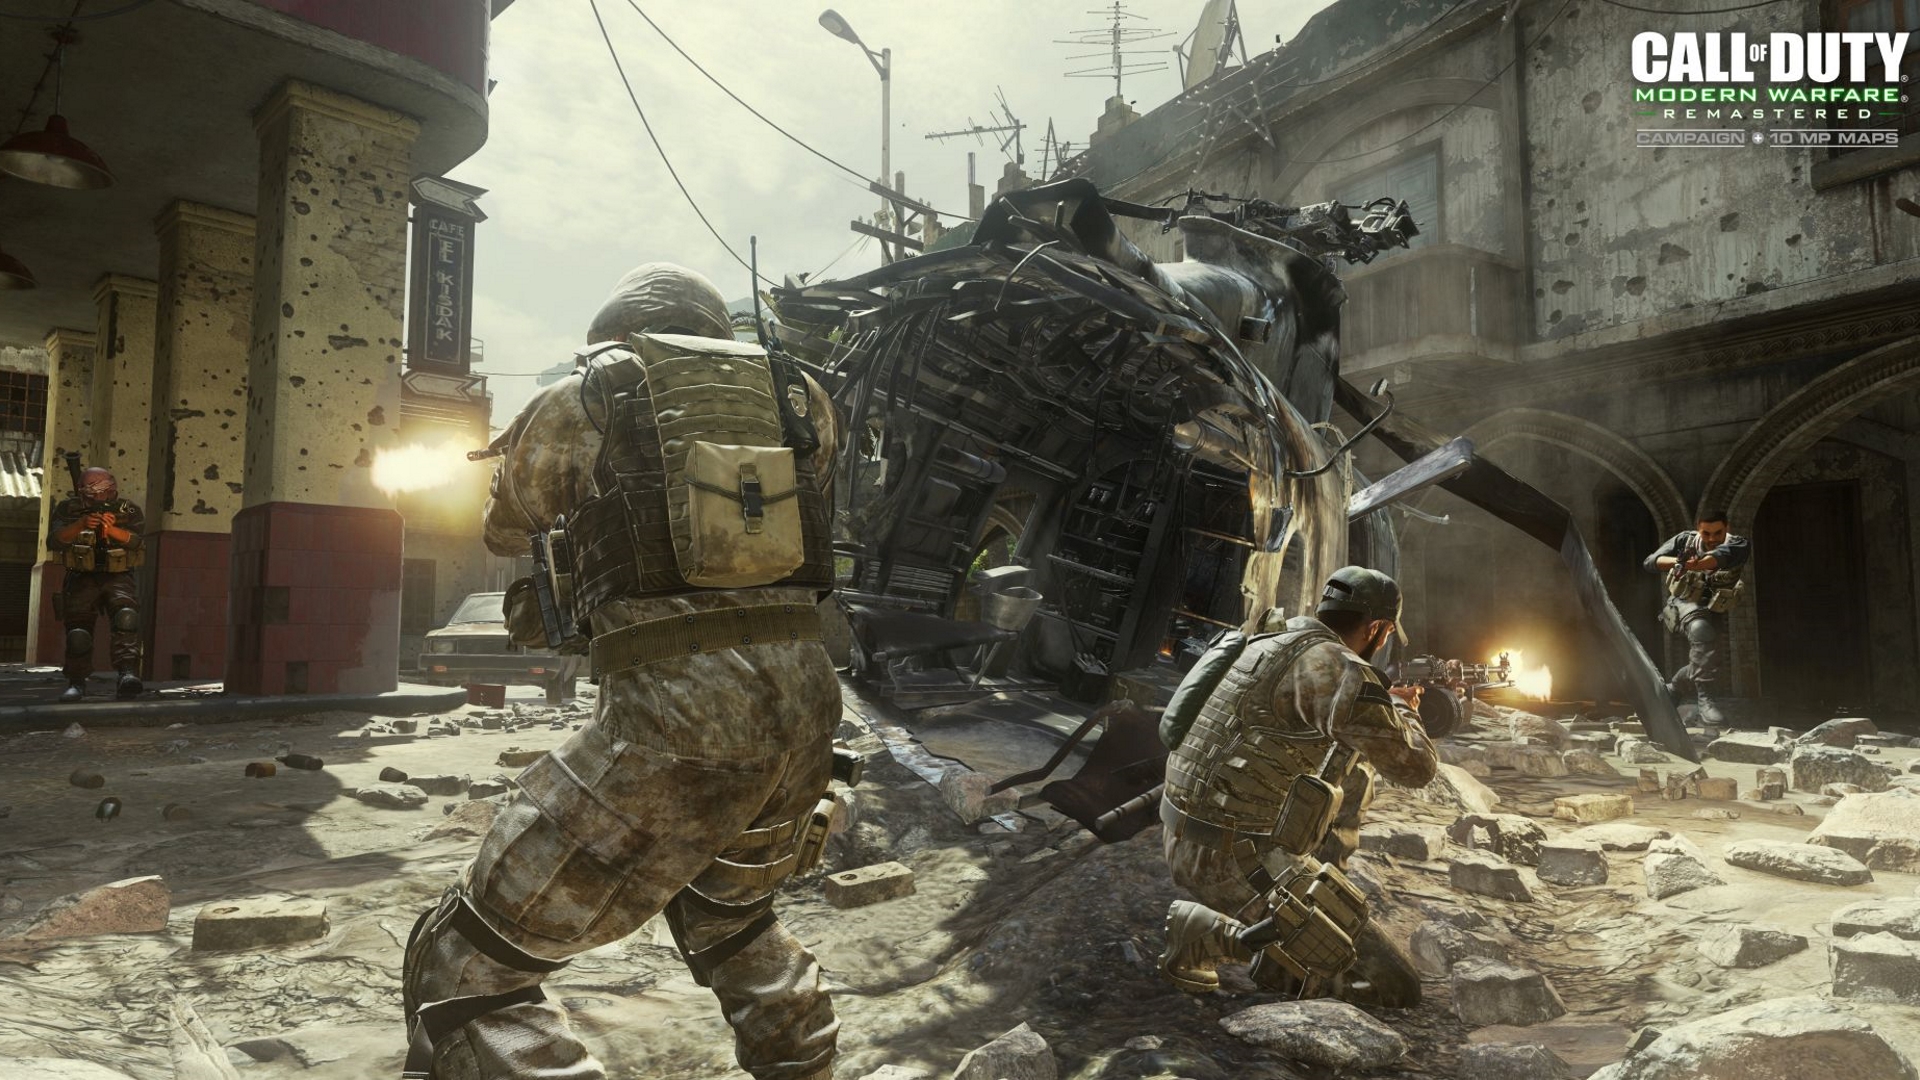 How To Download Modern Warfare Remastered Campaign